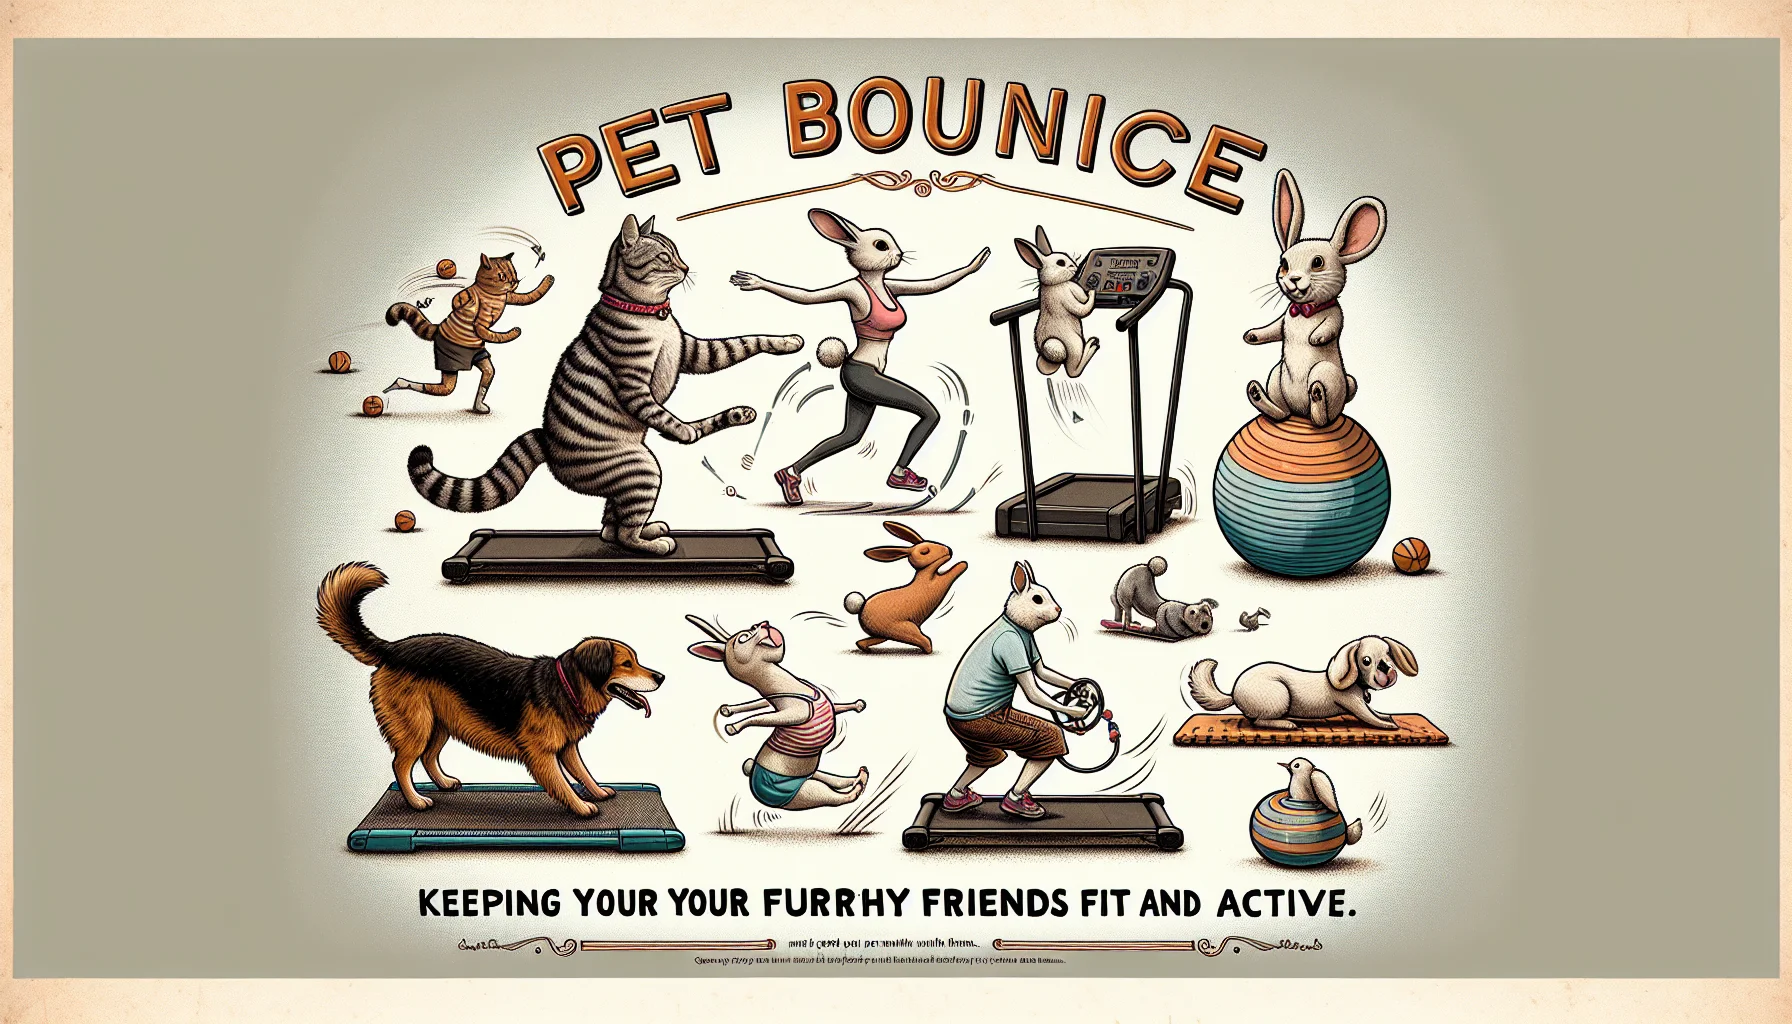 Generate a lively and humorous image that shows a range of different animals actively engaging in exercise as a promotion for 'Pet Bounce'. It includes a cat doing yoga, a dog playing fetch energetically, a rabbit hopping on a small treadmill, and a bird standing on an exercise ball. The animals are portrayed having fun, their bodies fit, illustrating an invitation for people to exercise and enjoy healthiness. The words 'Pet Bounce: Keeping Your Furry Friends Fit and Active' are featured prominently yet elegantly in the image, spurring people and their pets towards activity and fitness.